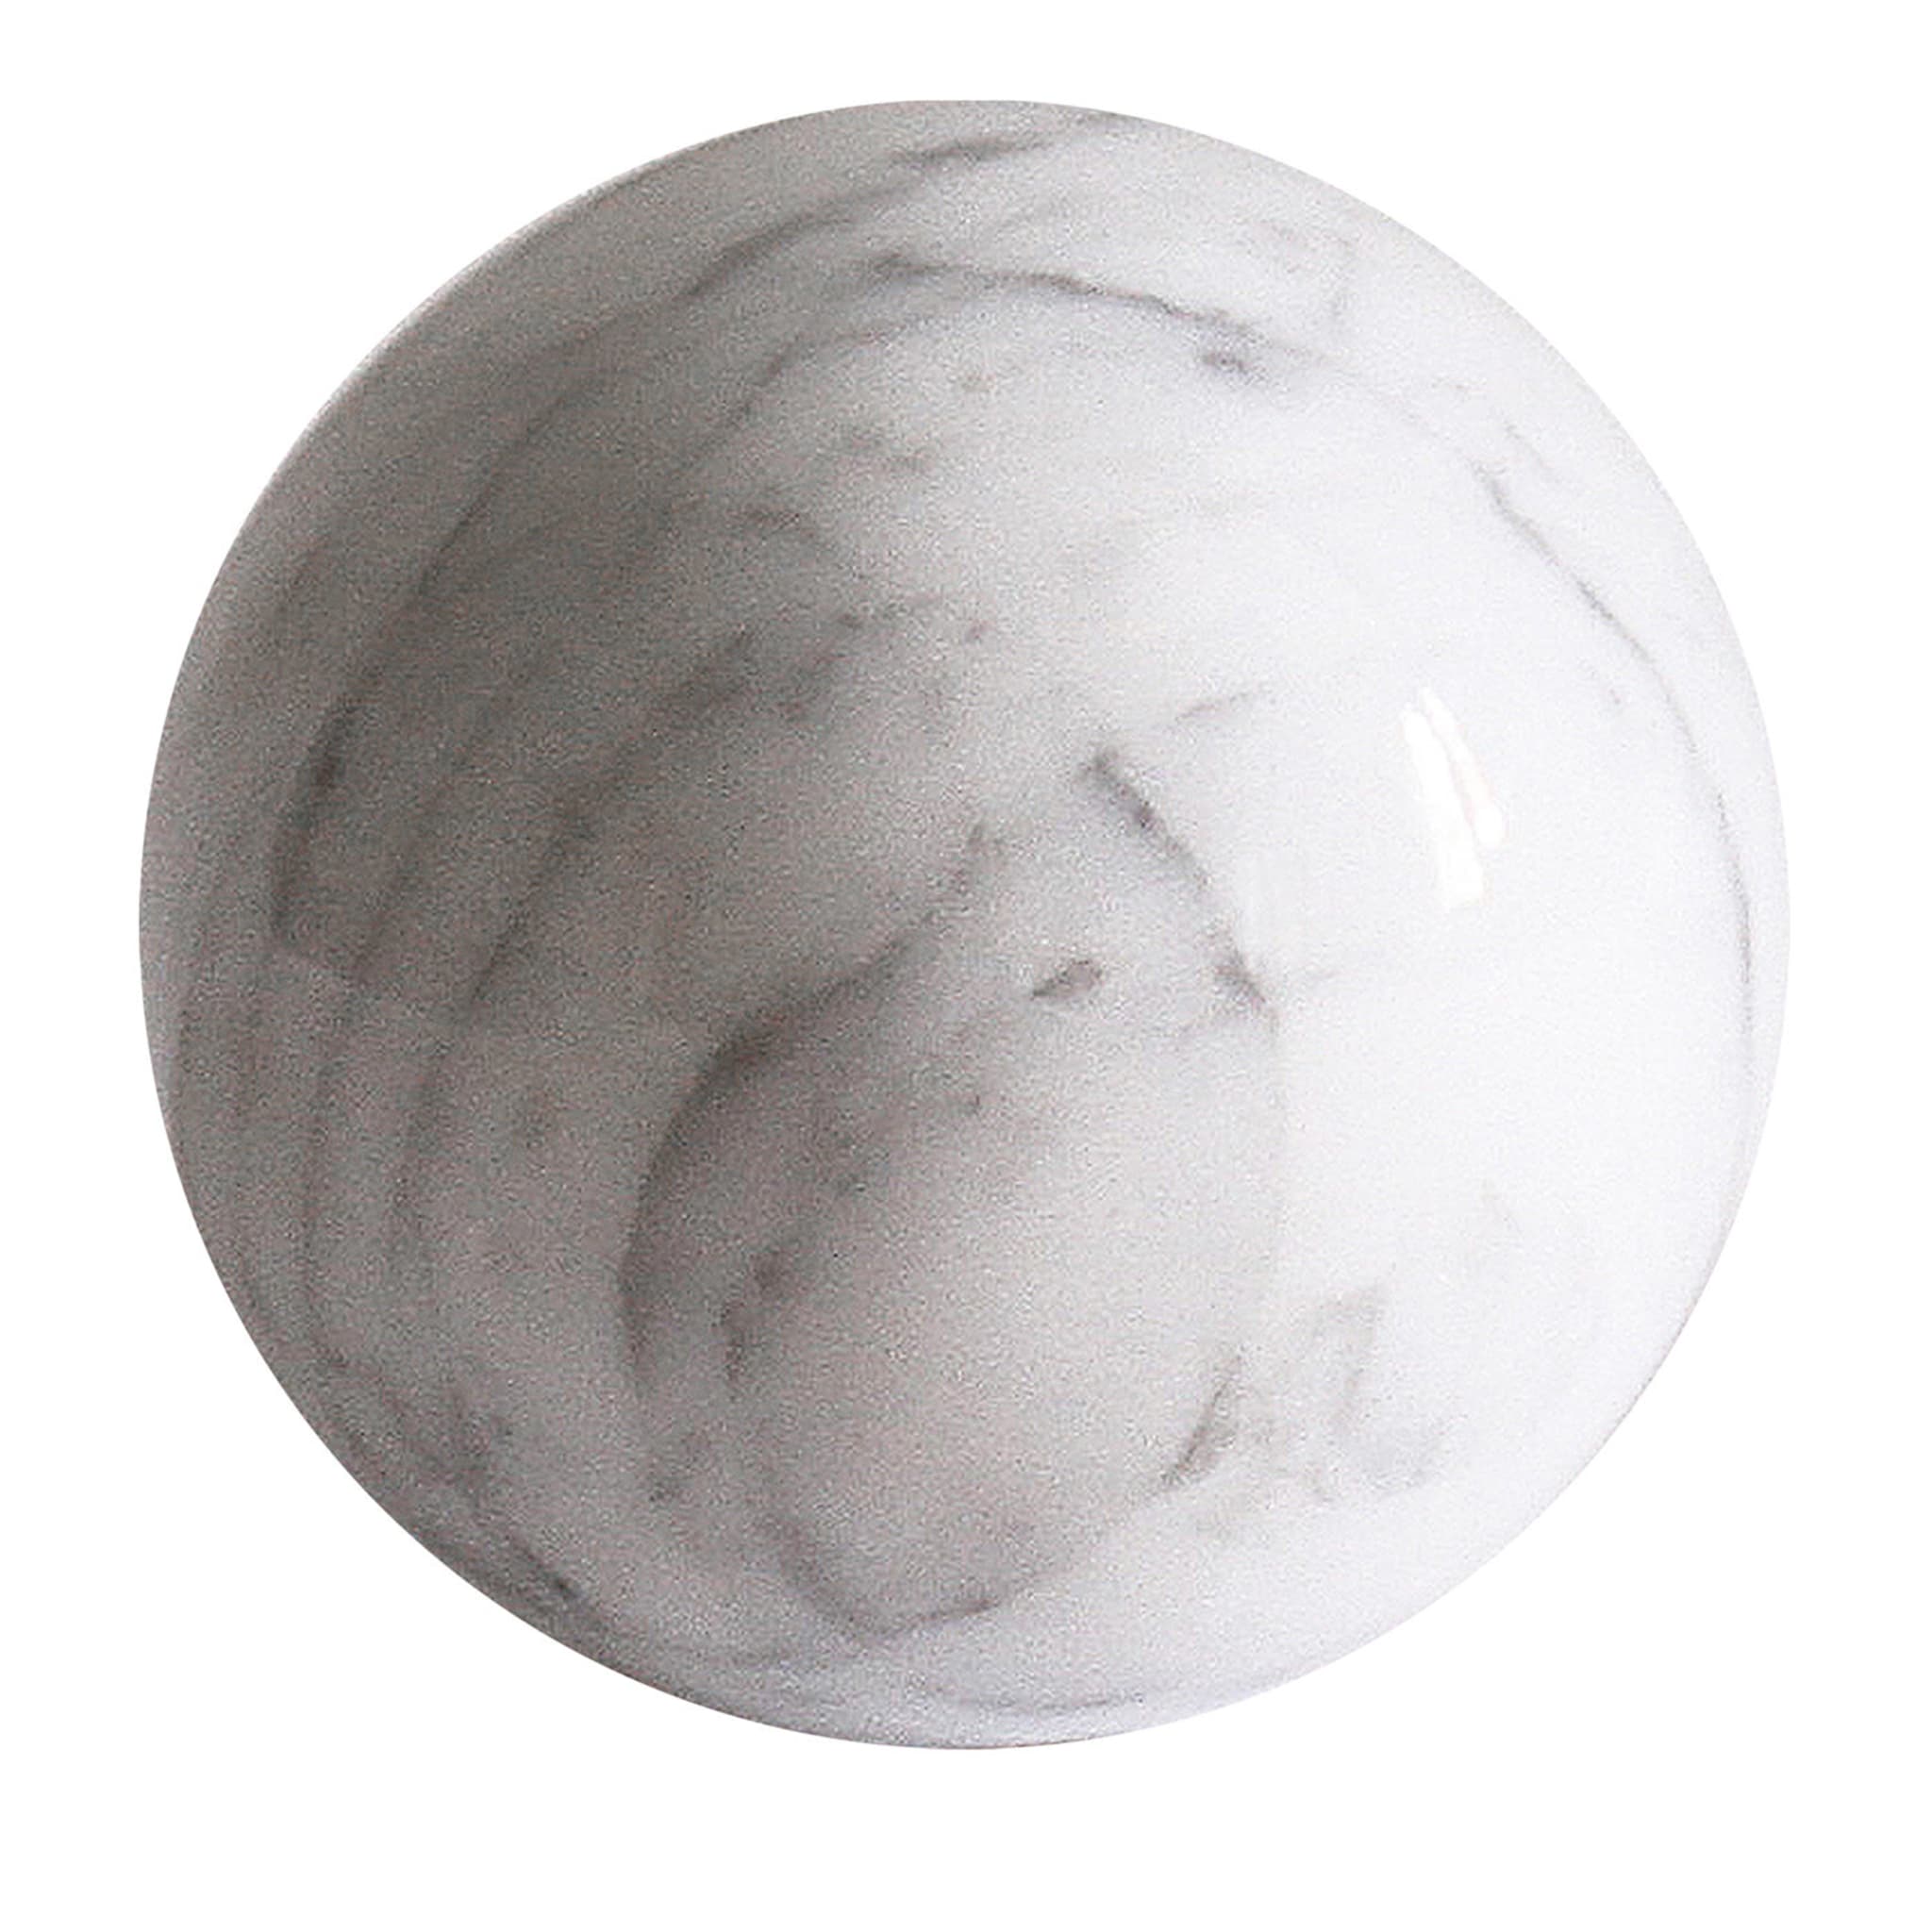 White Marble Decorative Sphere #1 - Main view